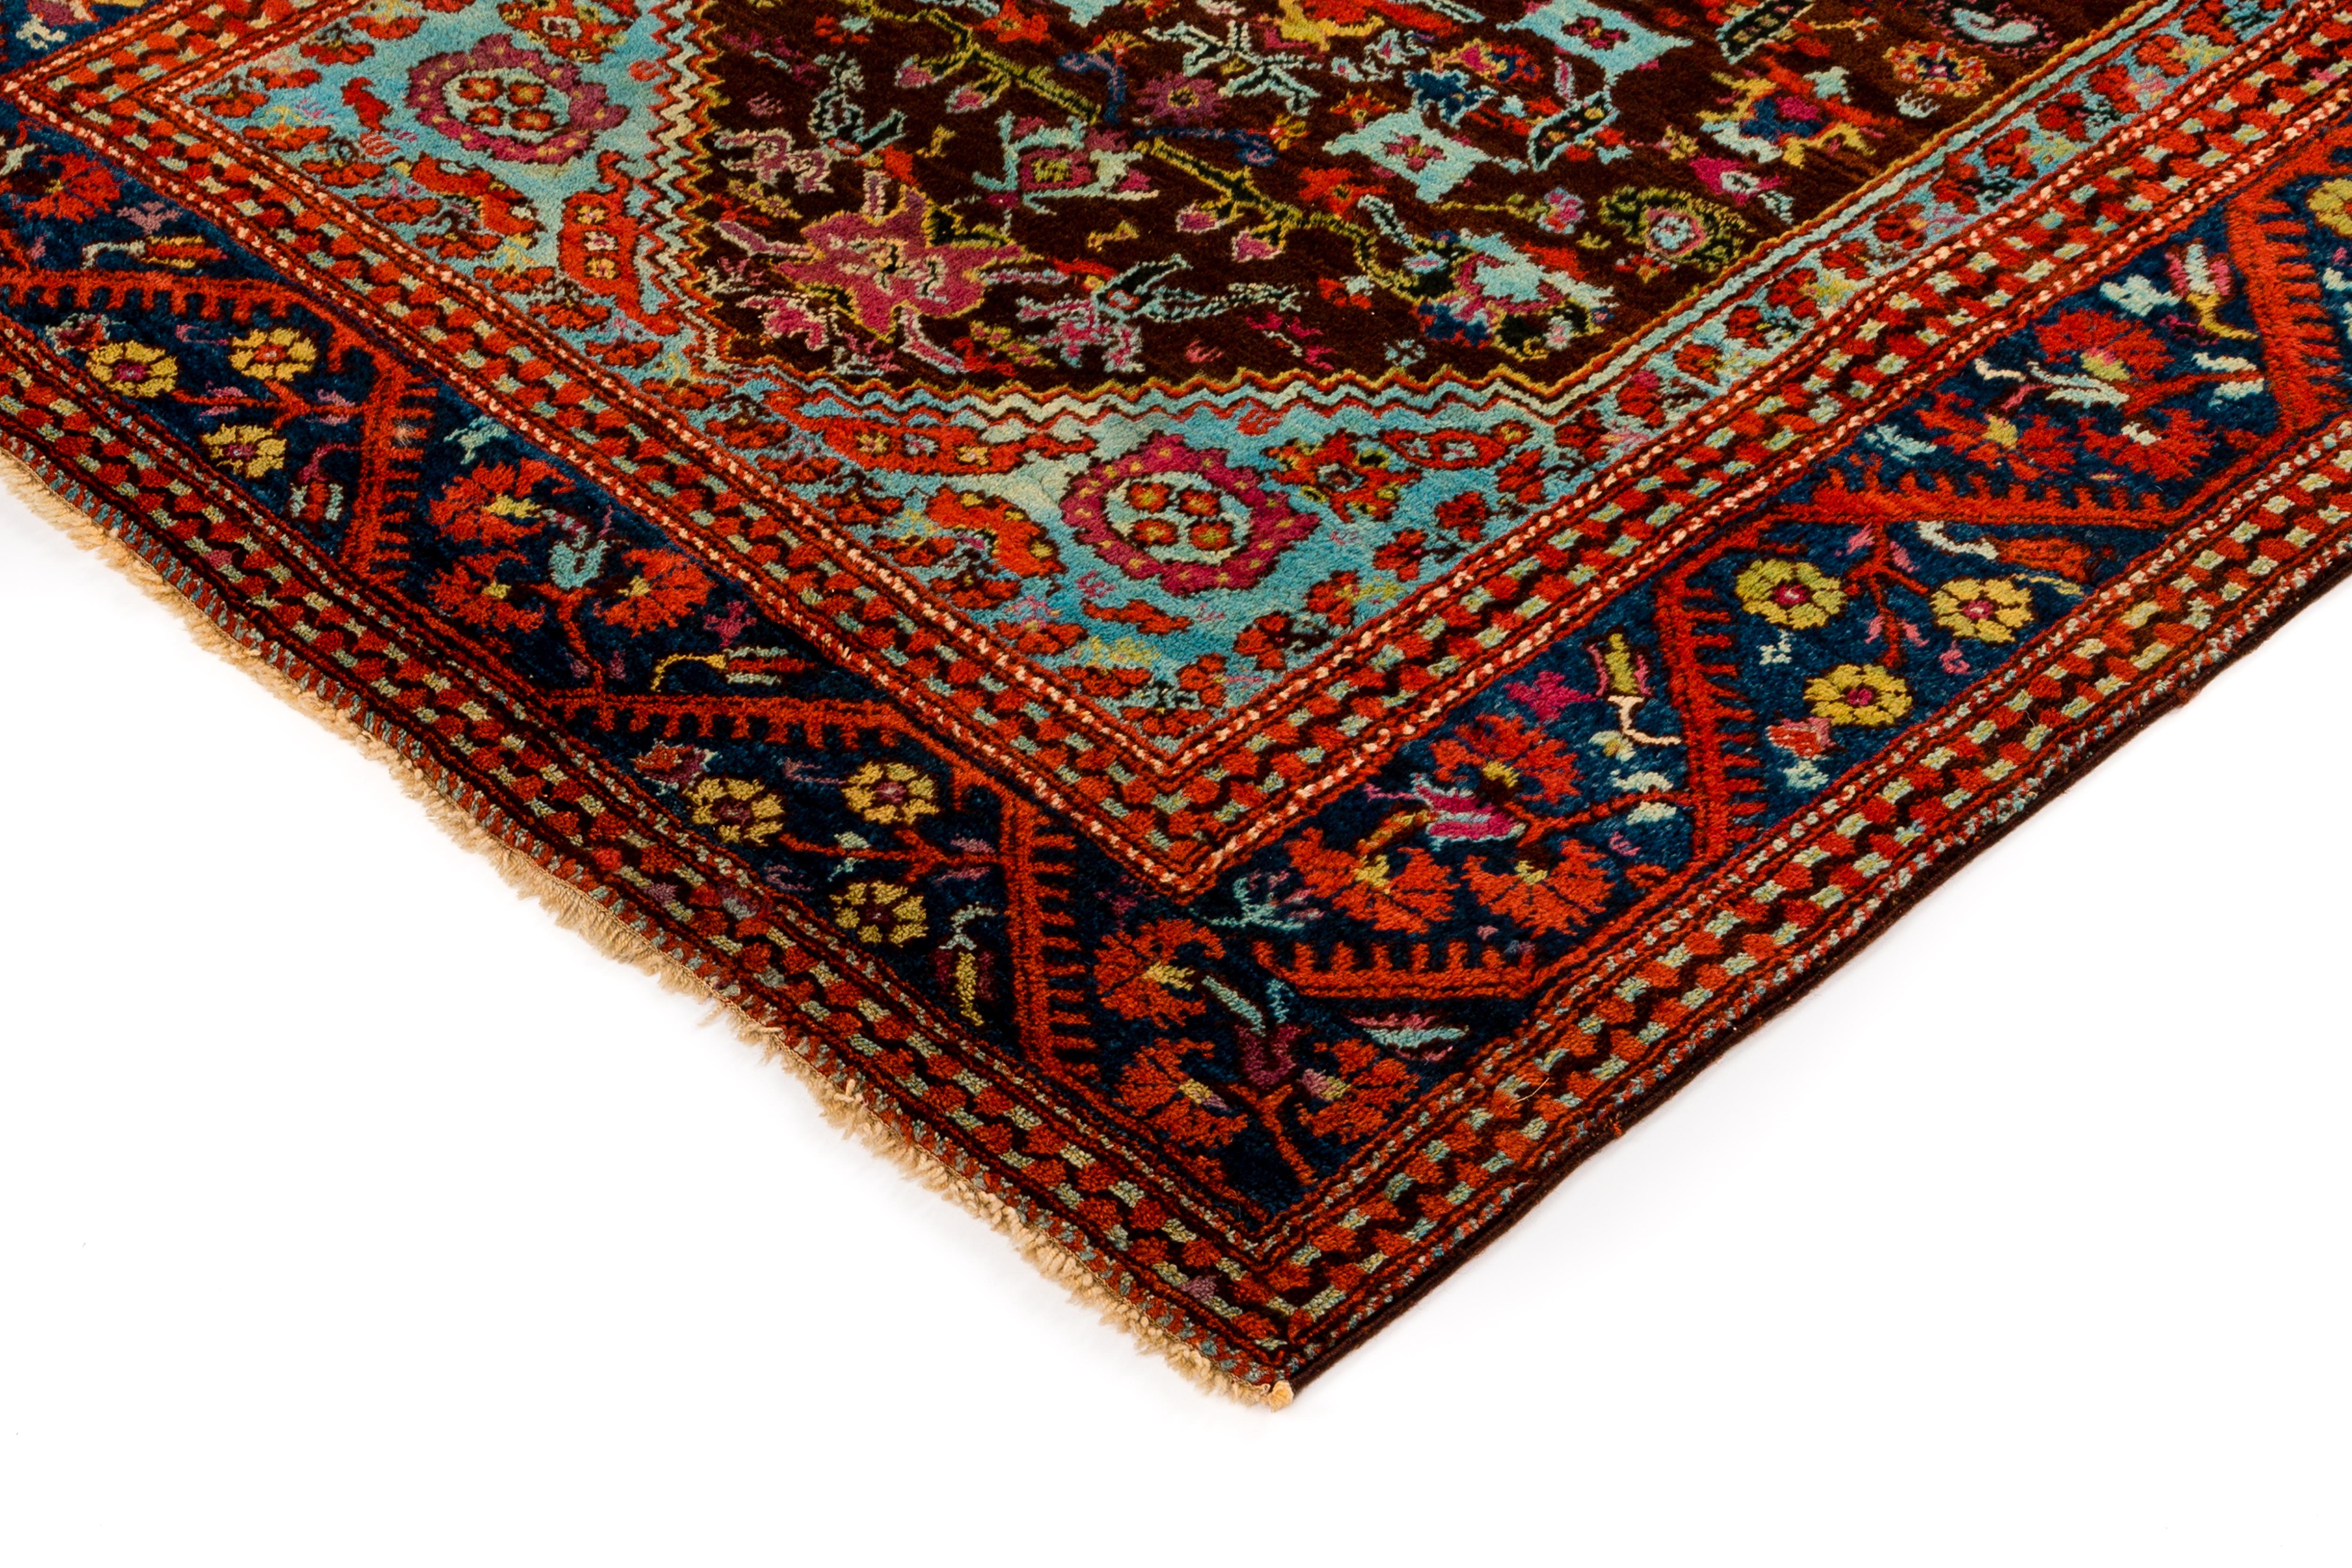 This newly woven, room-size rug is inspired by antique Persian carpets from the 19th century. Handmade in Afghanistan.